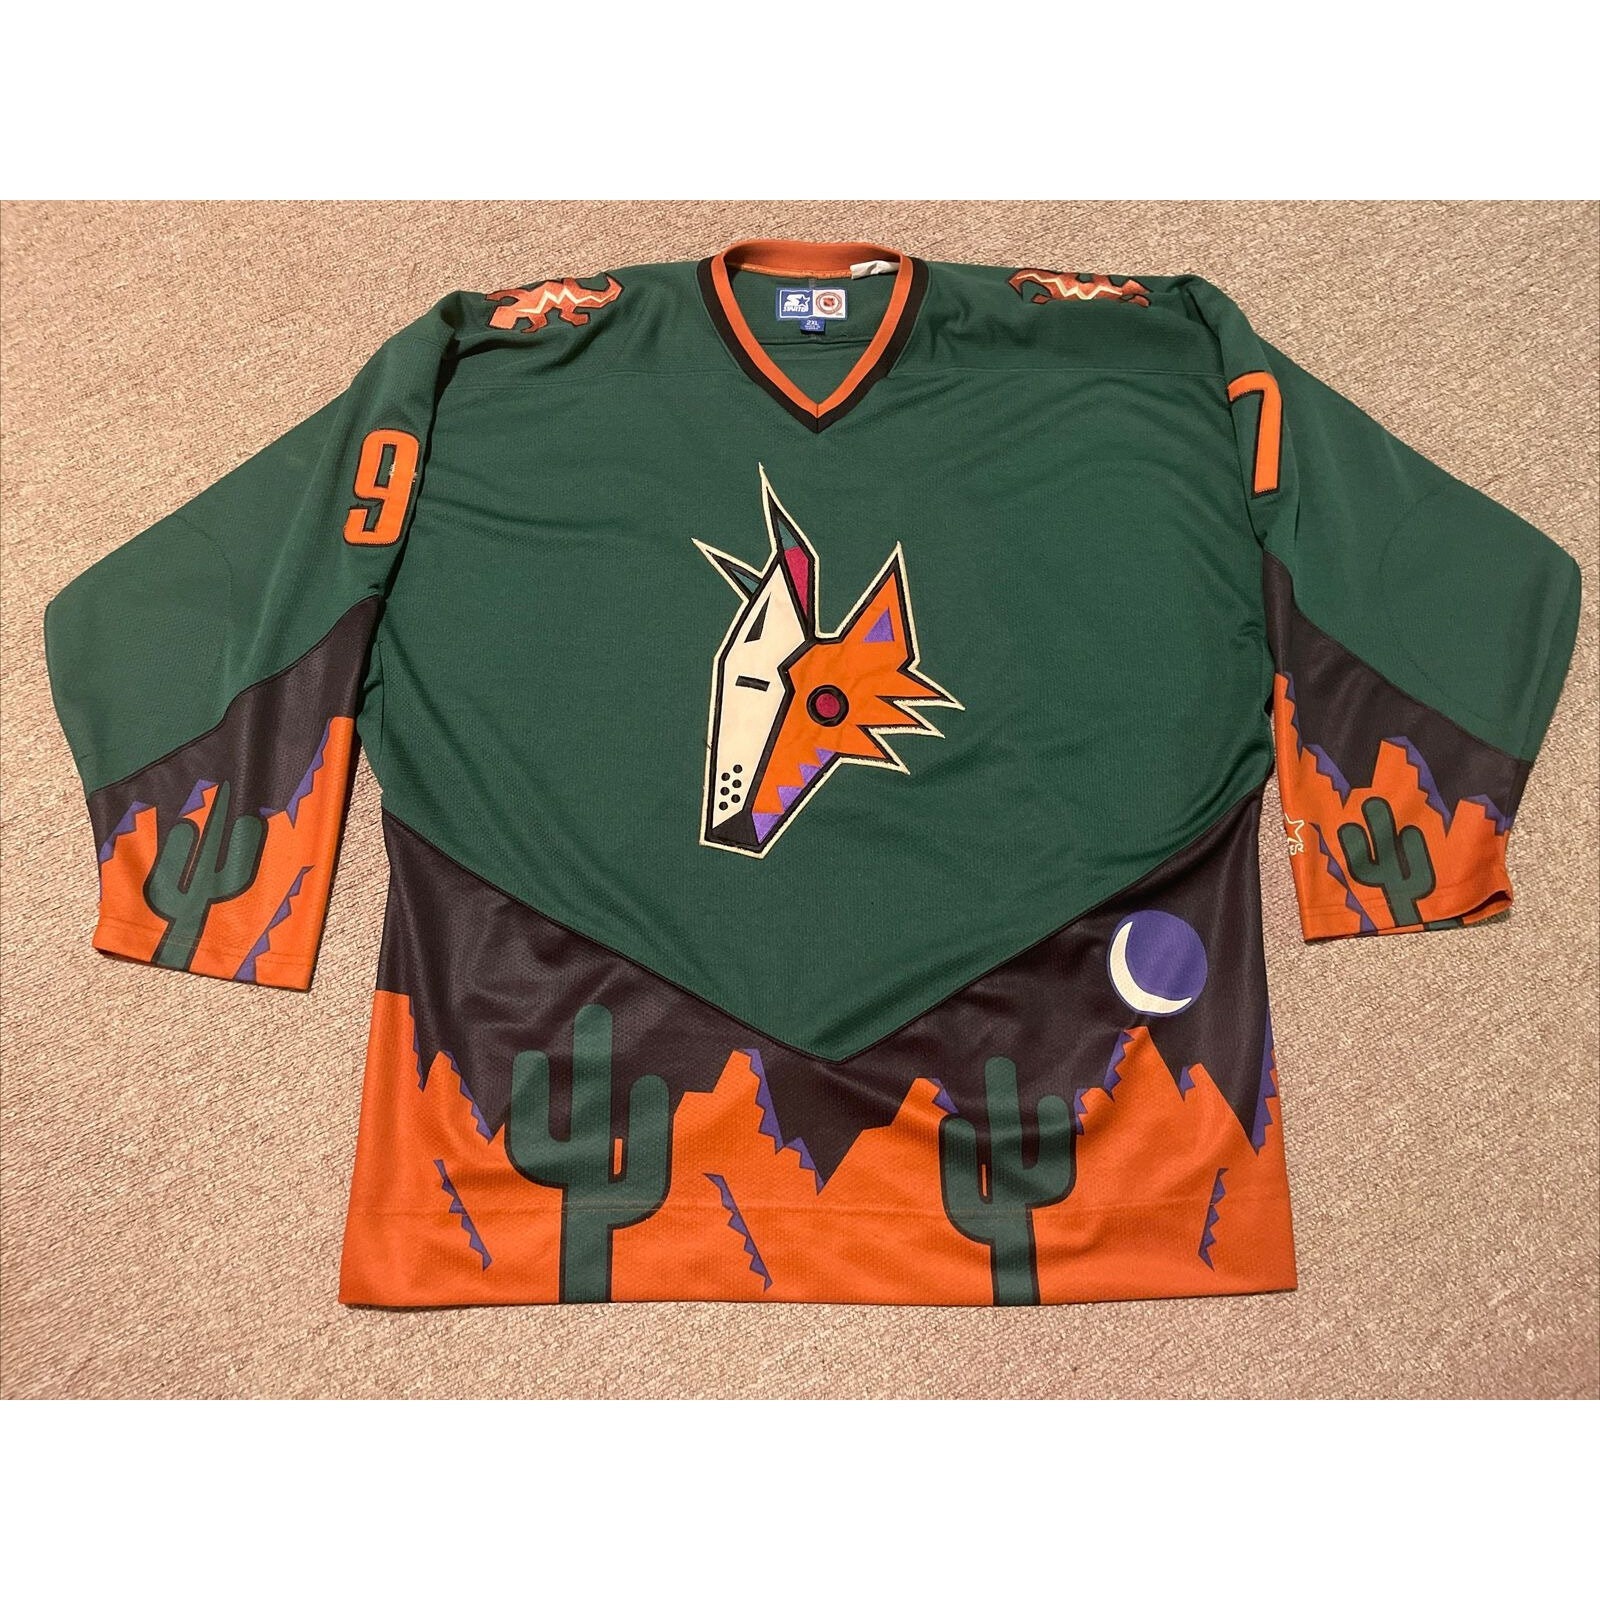 1998 Phoenix Coyotes Jersey 90s Coyotes Jersey1998 Coyotes -  Norway